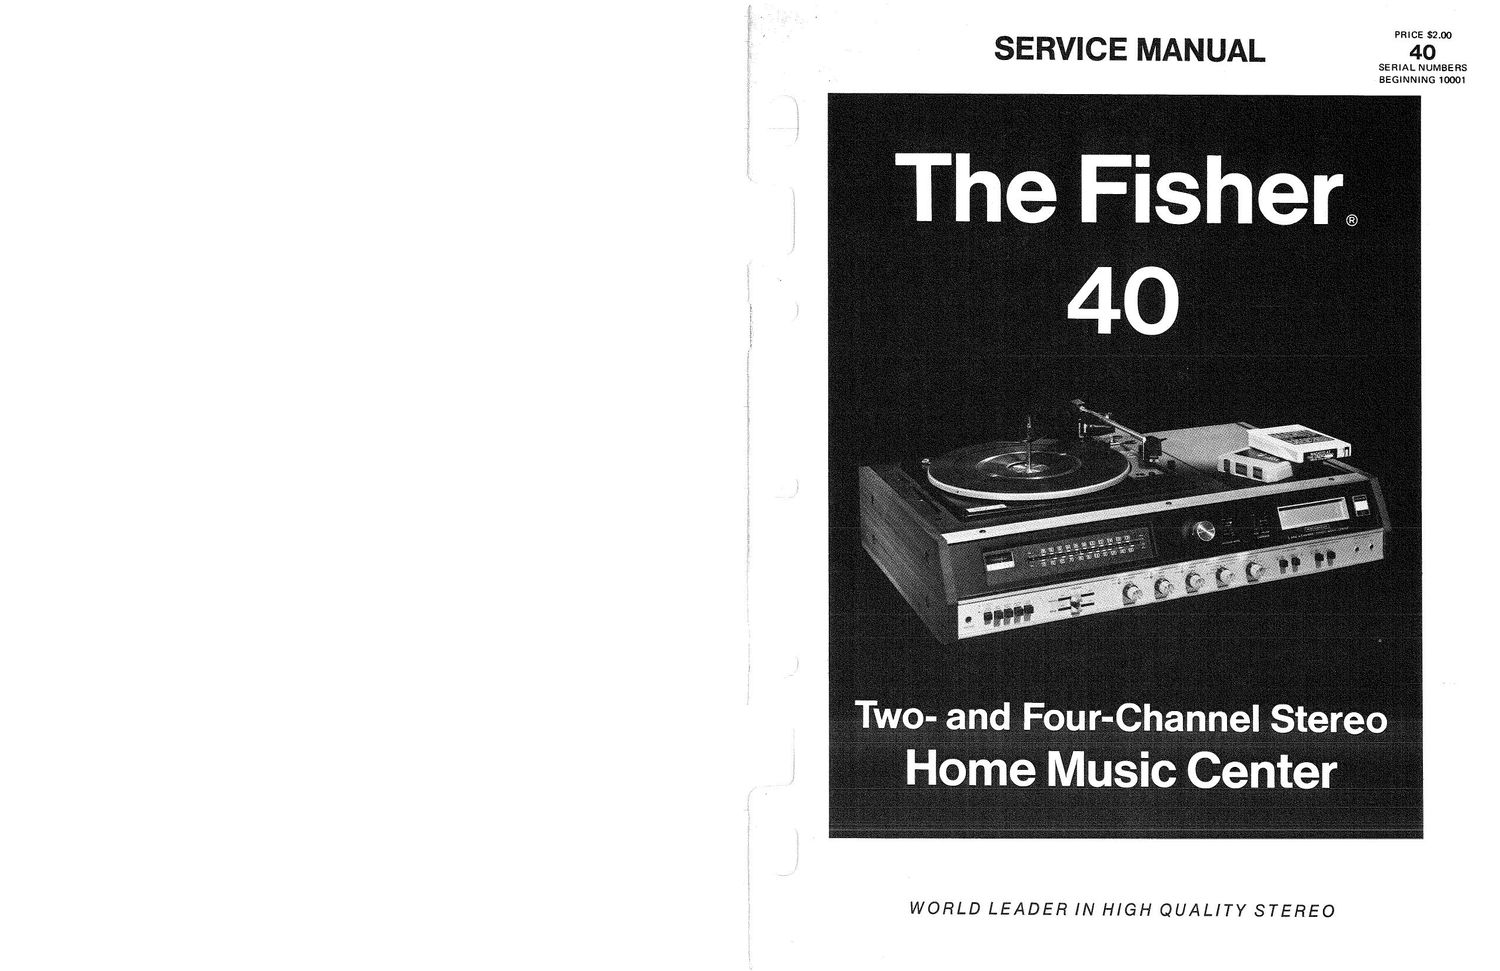 Fisher 40 Service Manual